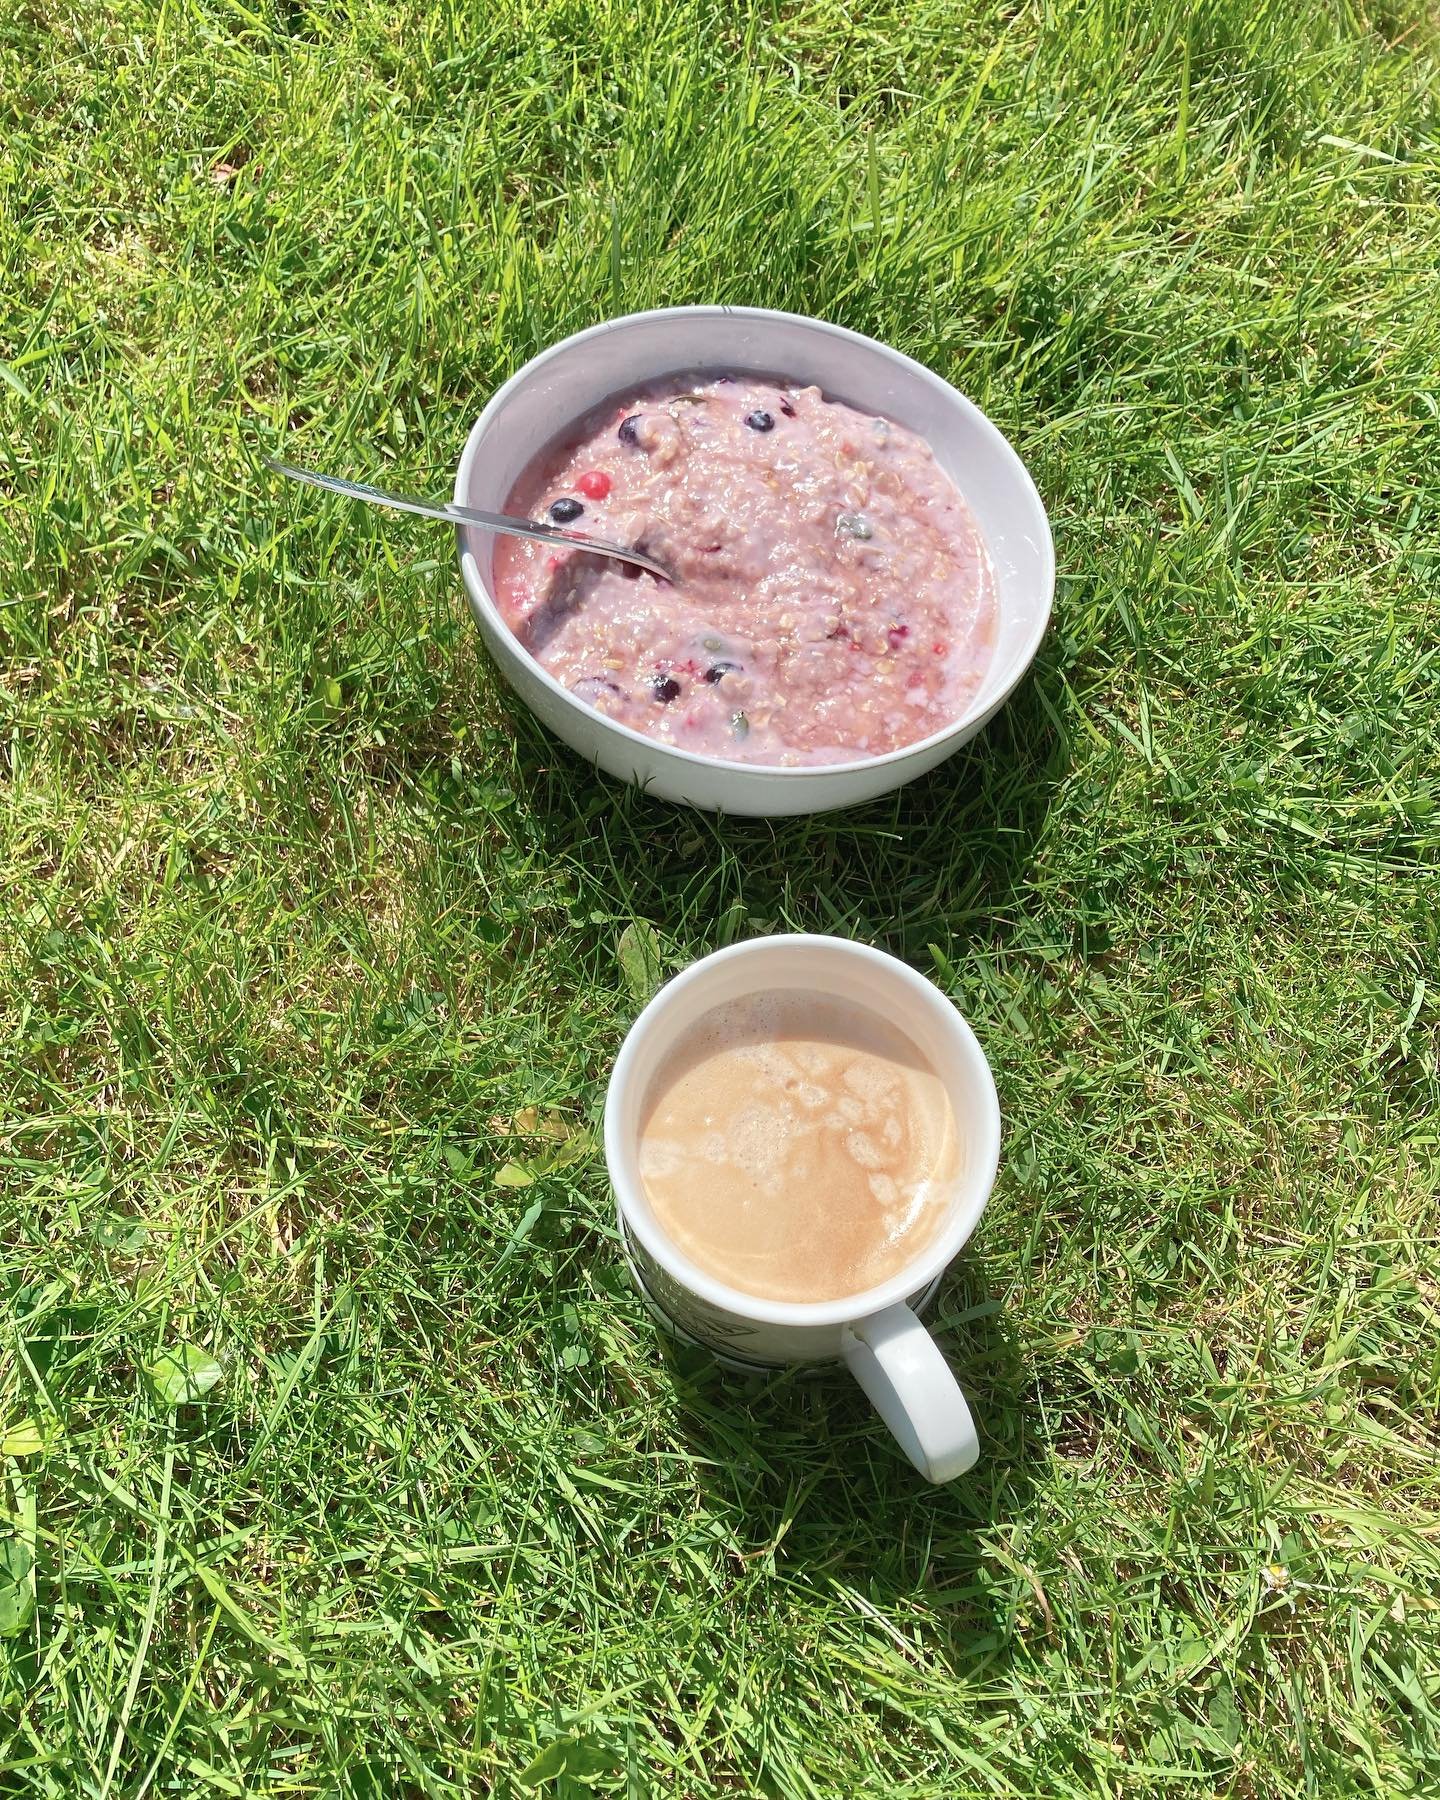 What a gorgeous sunny day! One of the perks of working from home is being able to take a break in the garden and actually eat something relatively nutritious for lunch. Moma porridge, sunflower seeds and red berries with a cuppa.
When I worked in a c